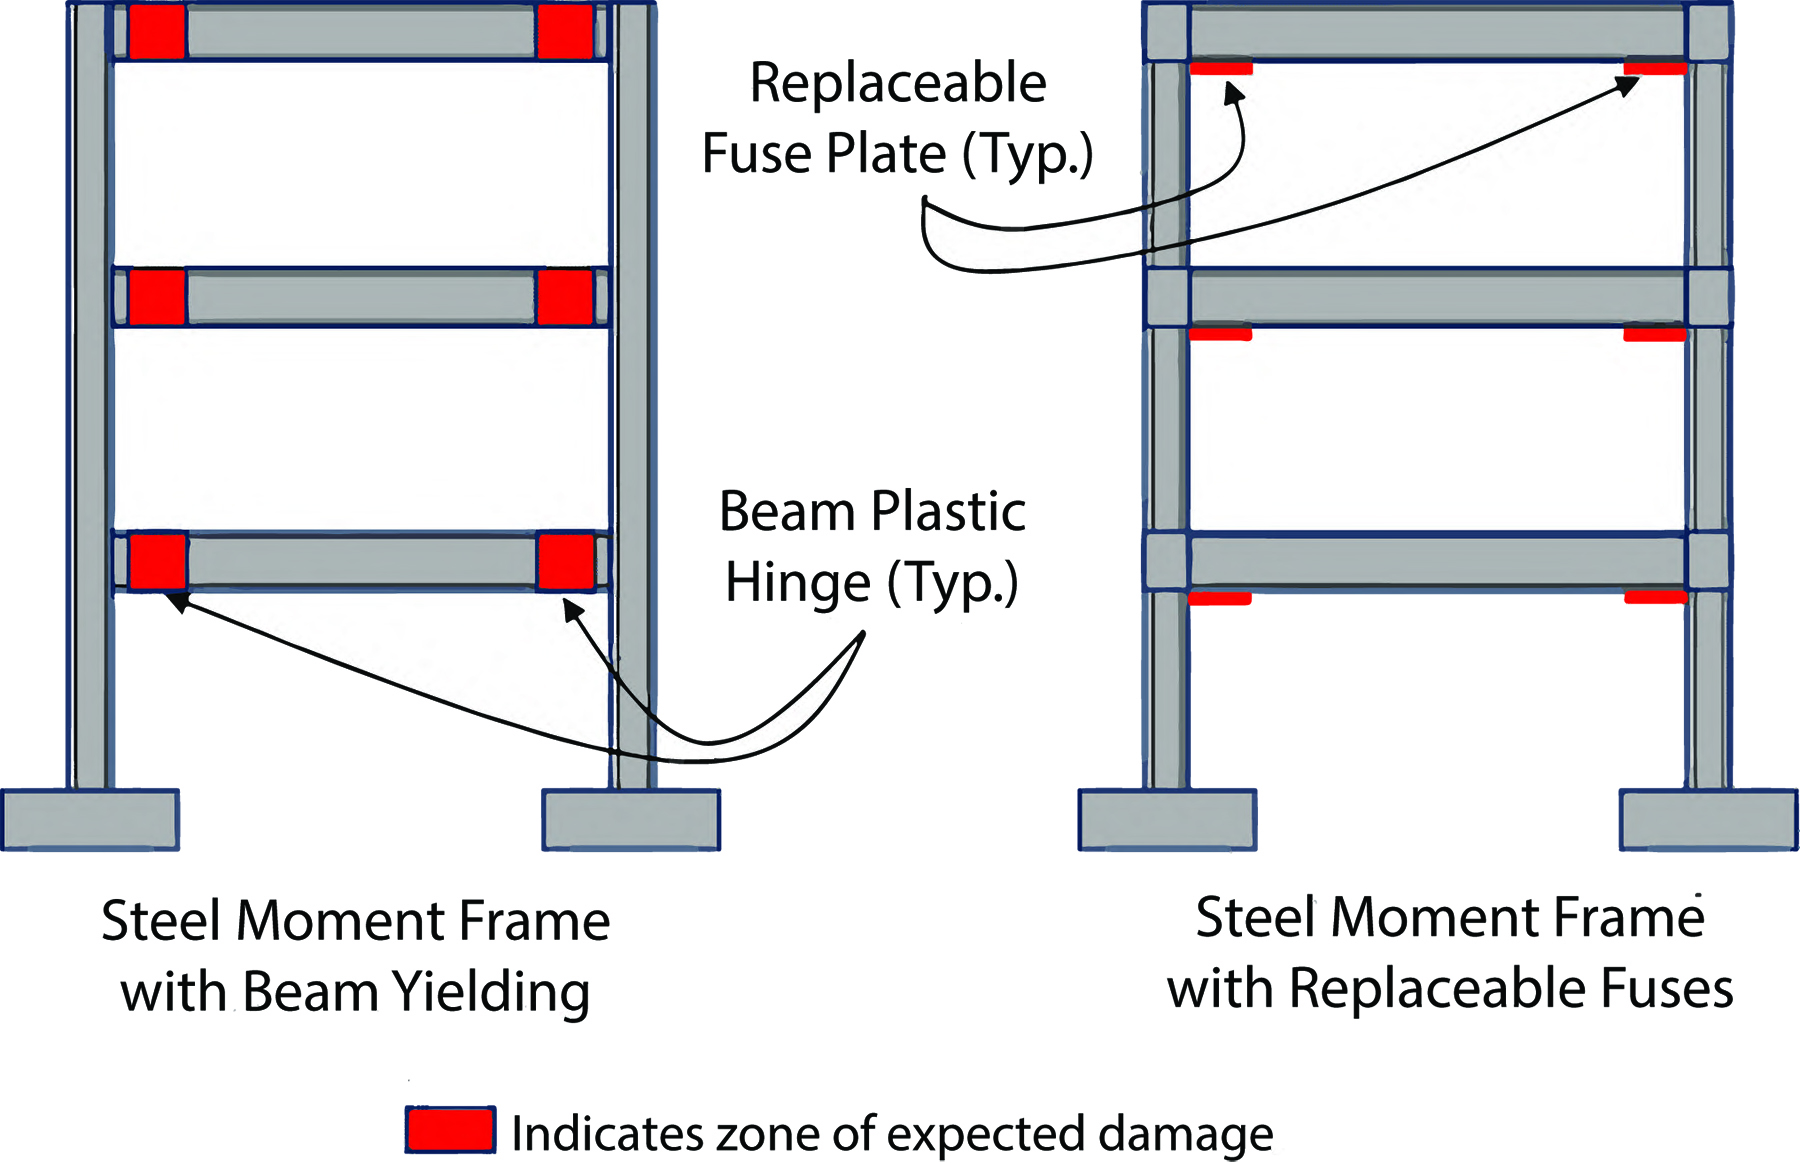 Figure shows a damage comparison between a steel moment frame beam with yielding and a steel moment frame with replaceable fuses